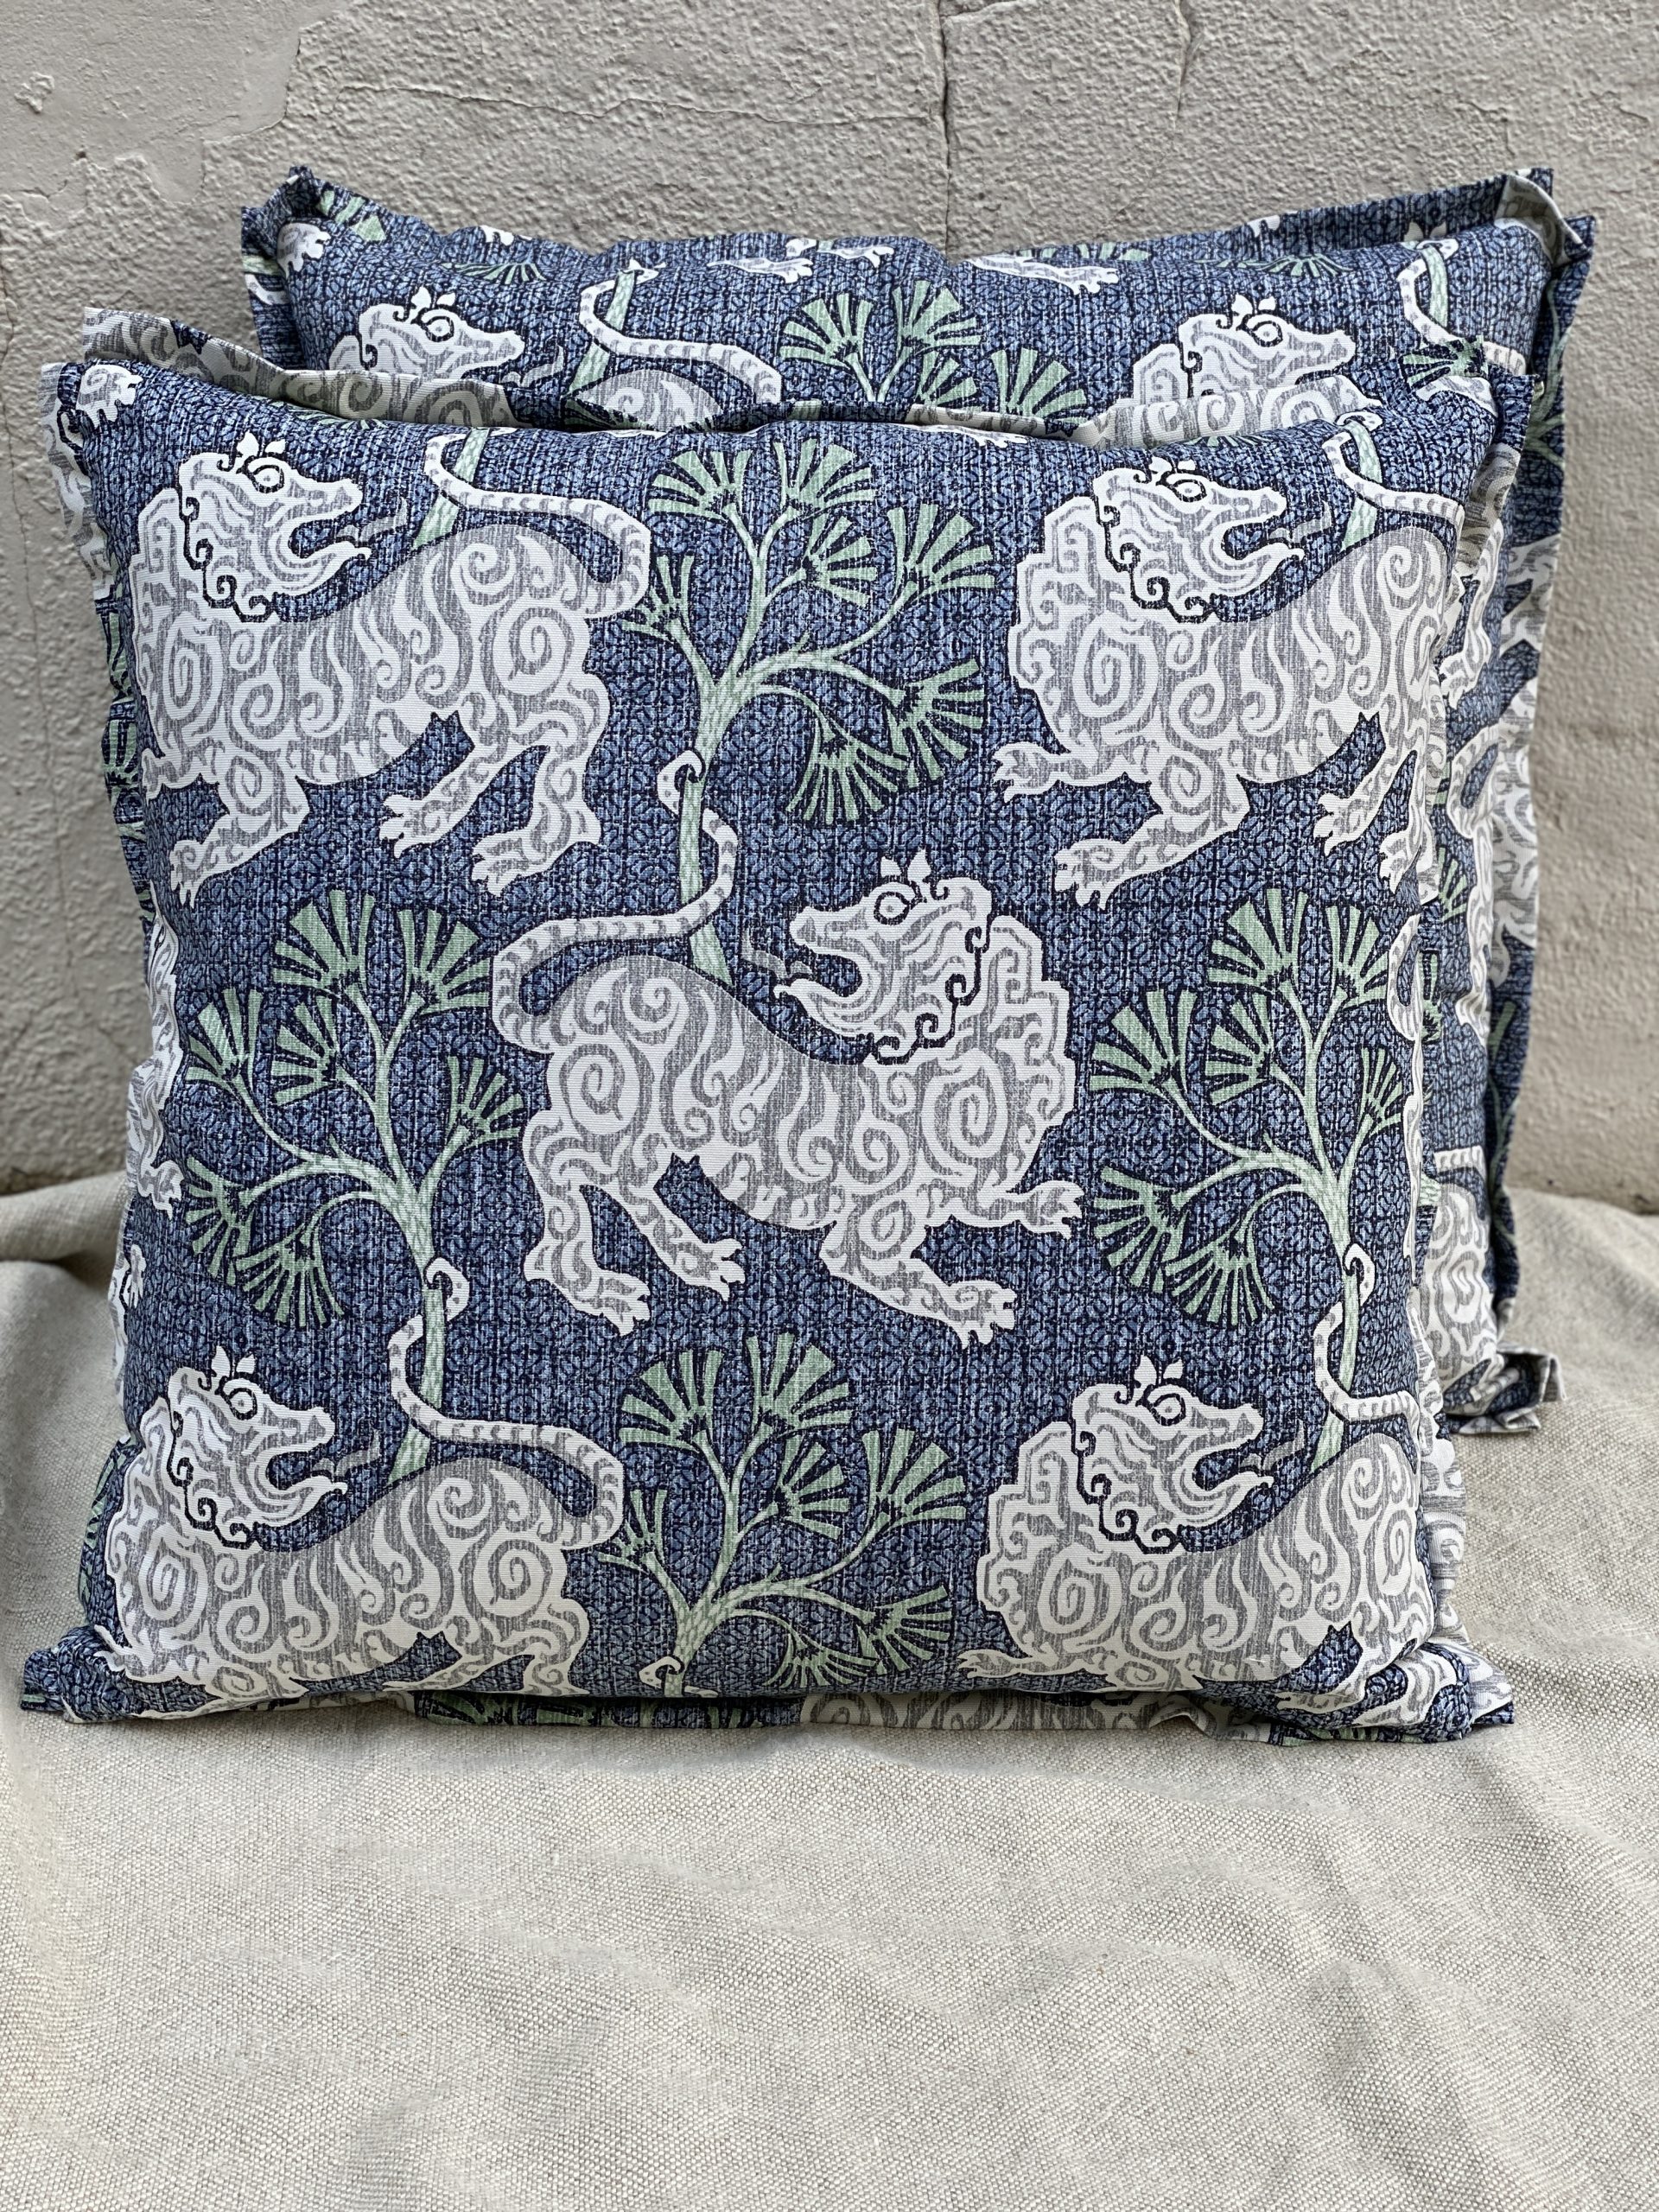 Pillows with Flange Border